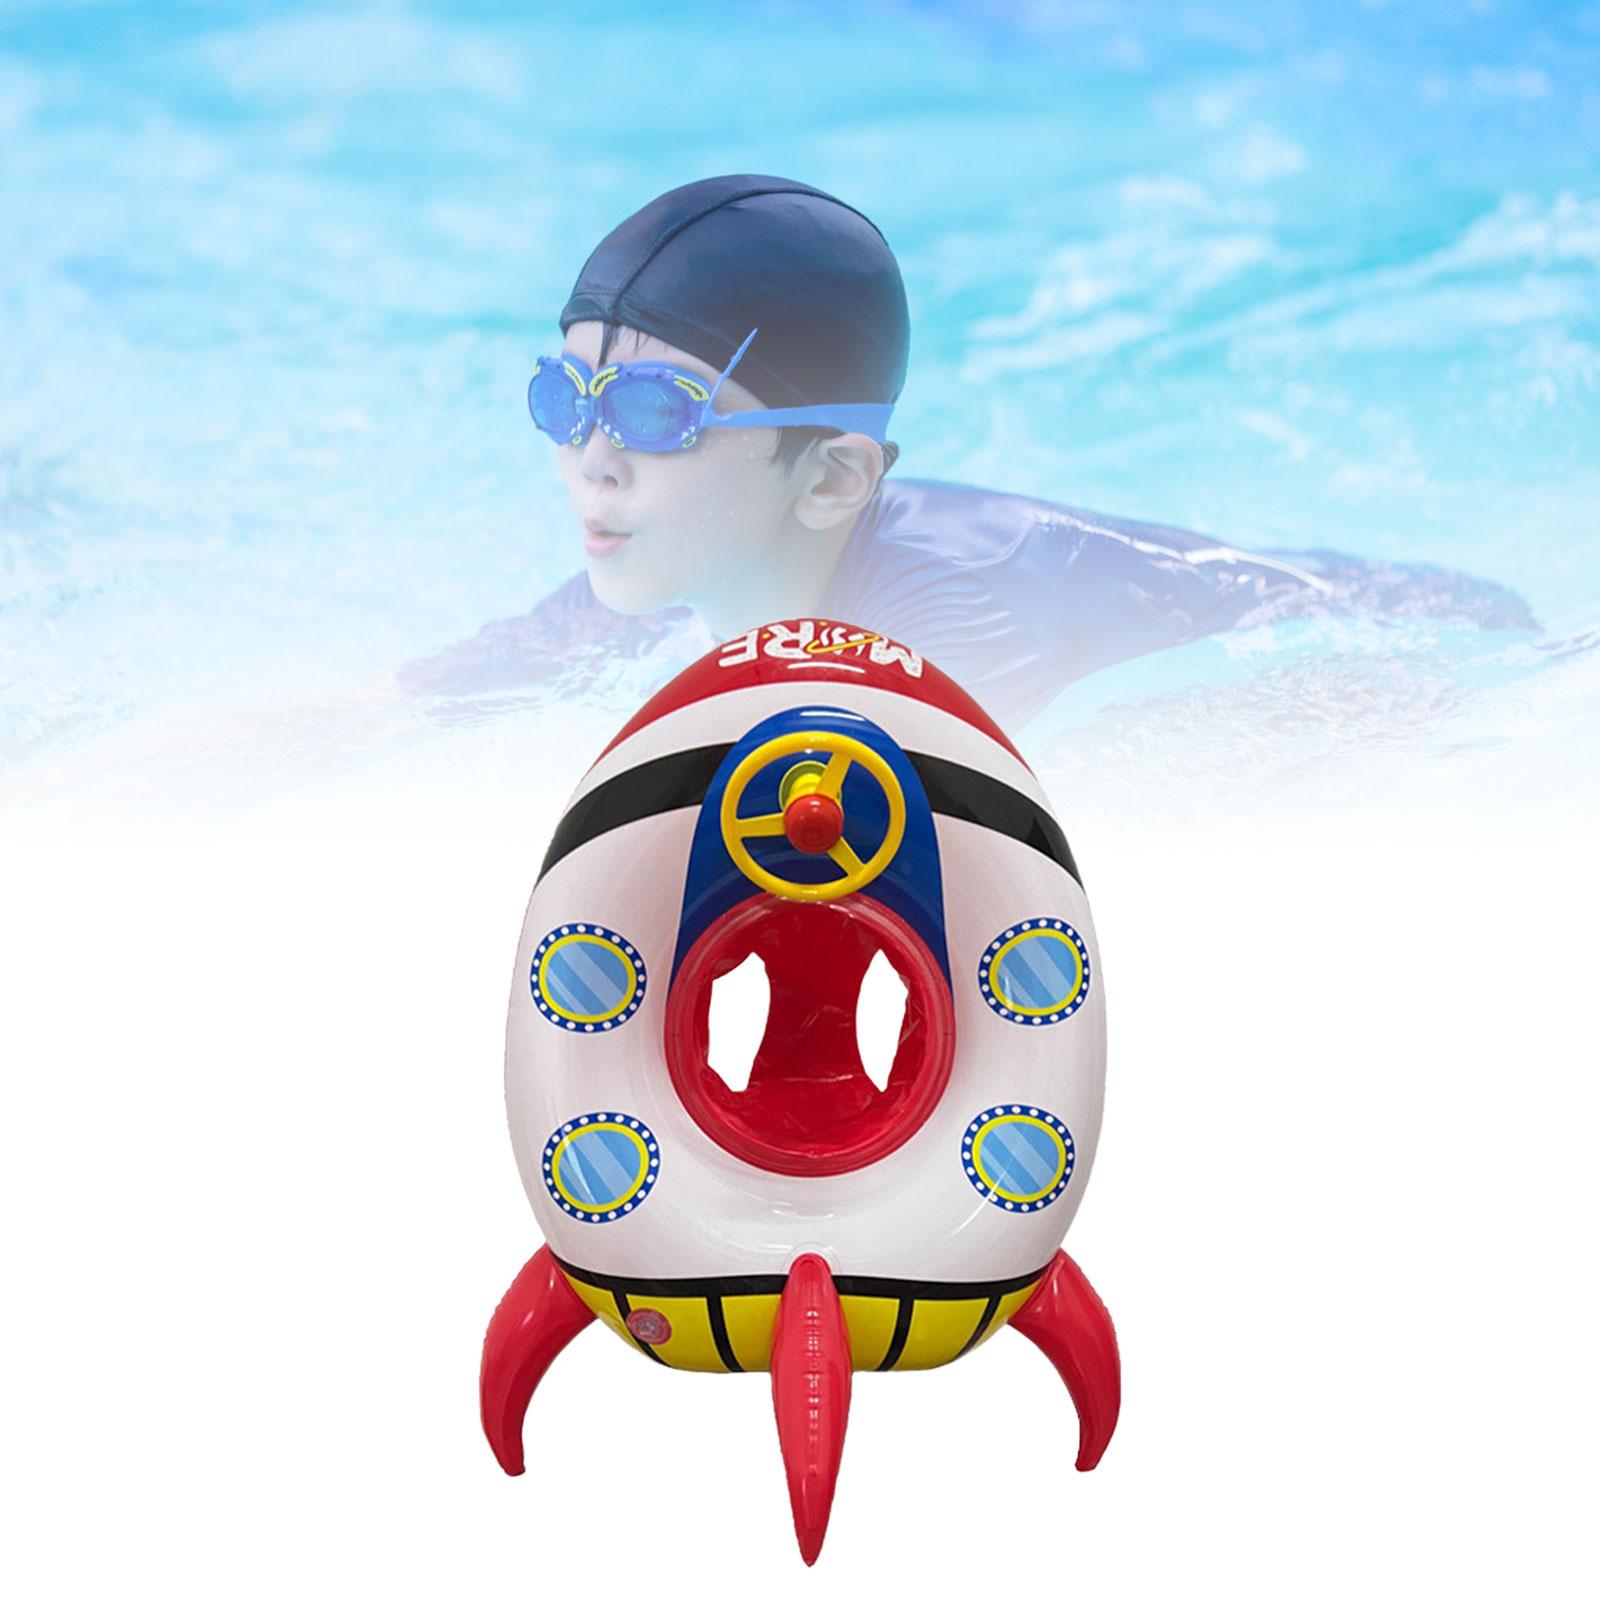 Kids Inflatable Float Seat Child Swim Ring for Party Vacation Indoor Outdoor White 61cmx76cm